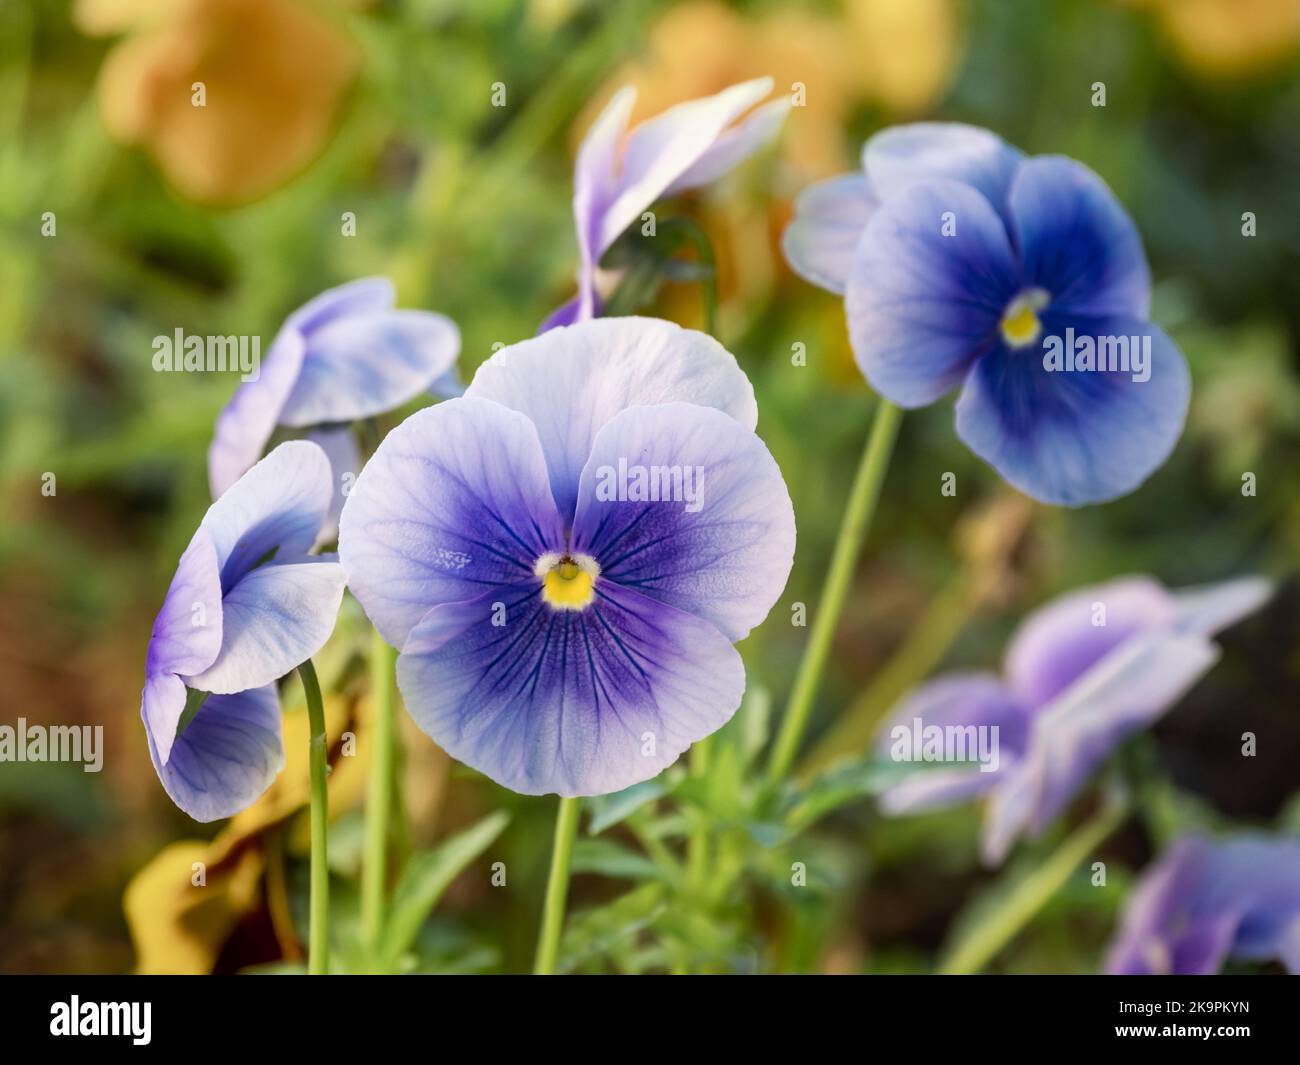 Blooming Viola tricolor, also known as wild pansy, Johnny Jump up, heartsease, heart's delight, tickle-my-fancy, Jack-jump-up-and-kiss-me. Stock Photo